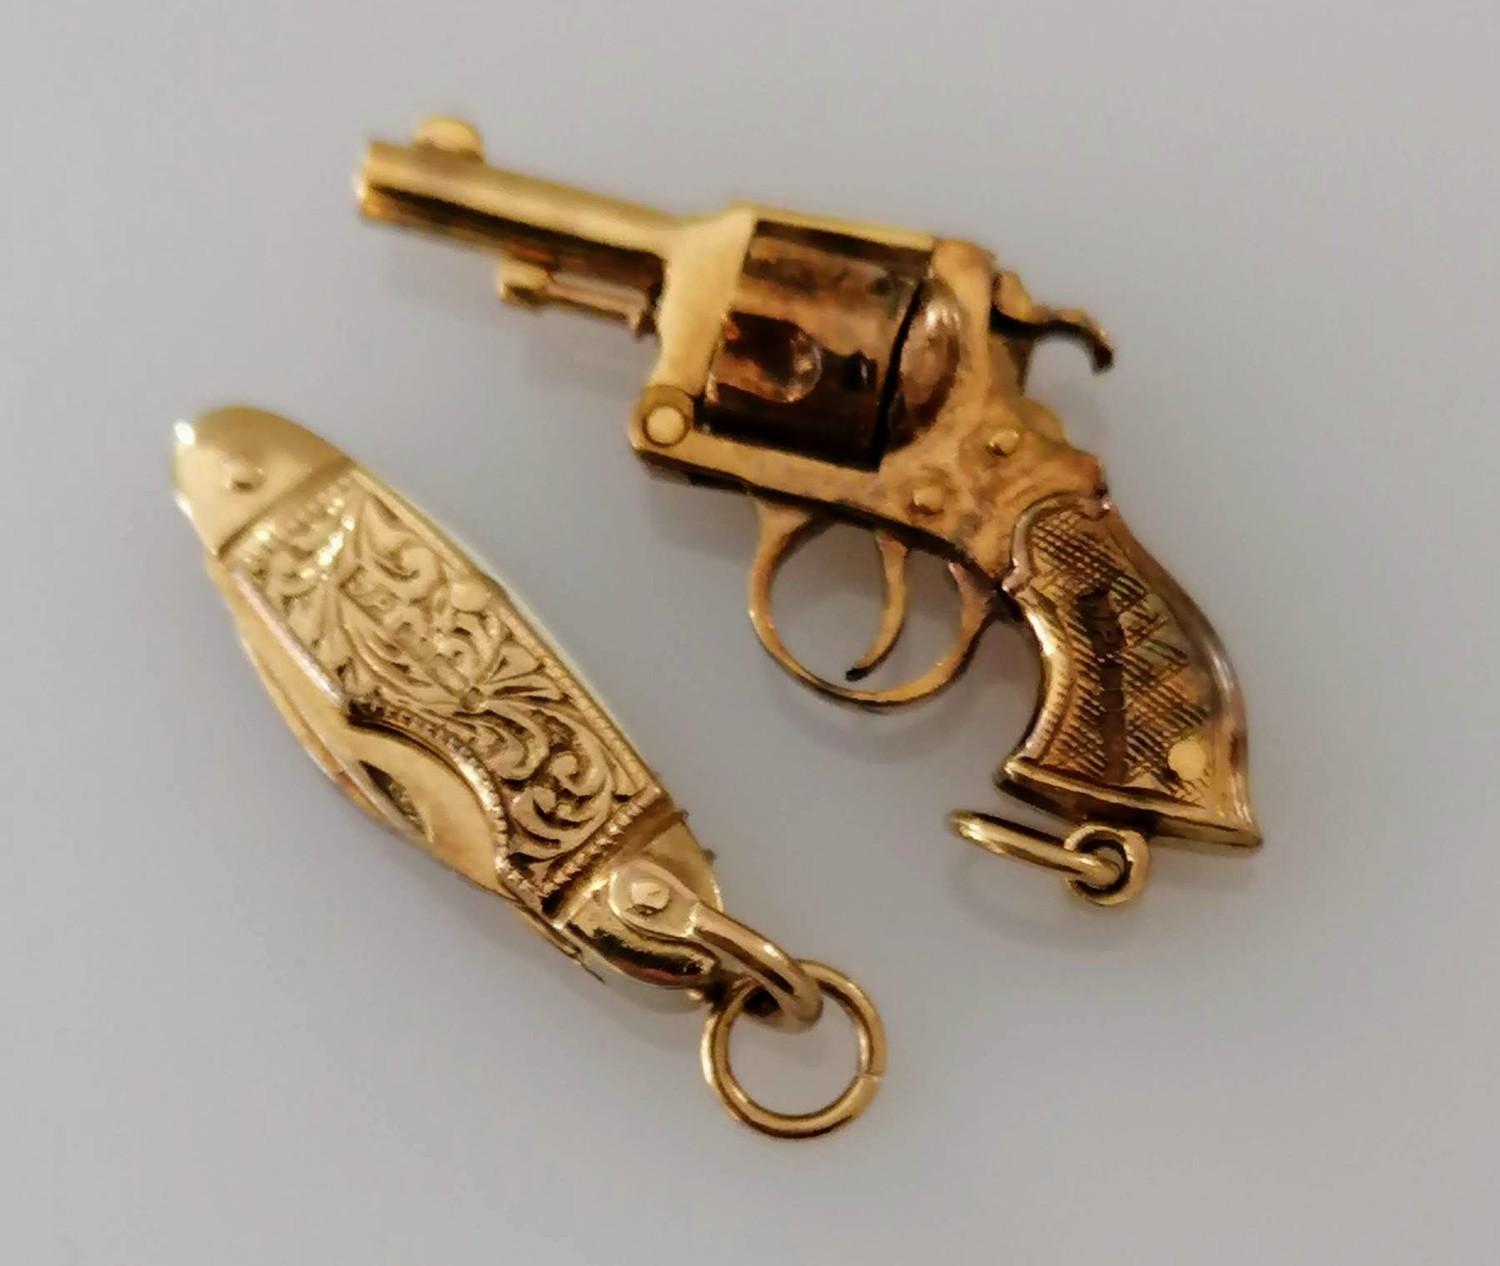 A 9ct gold pistol pendant or charm and penknife, both hallmarked, 38mm, 28mm, 12.6g - Image 2 of 2